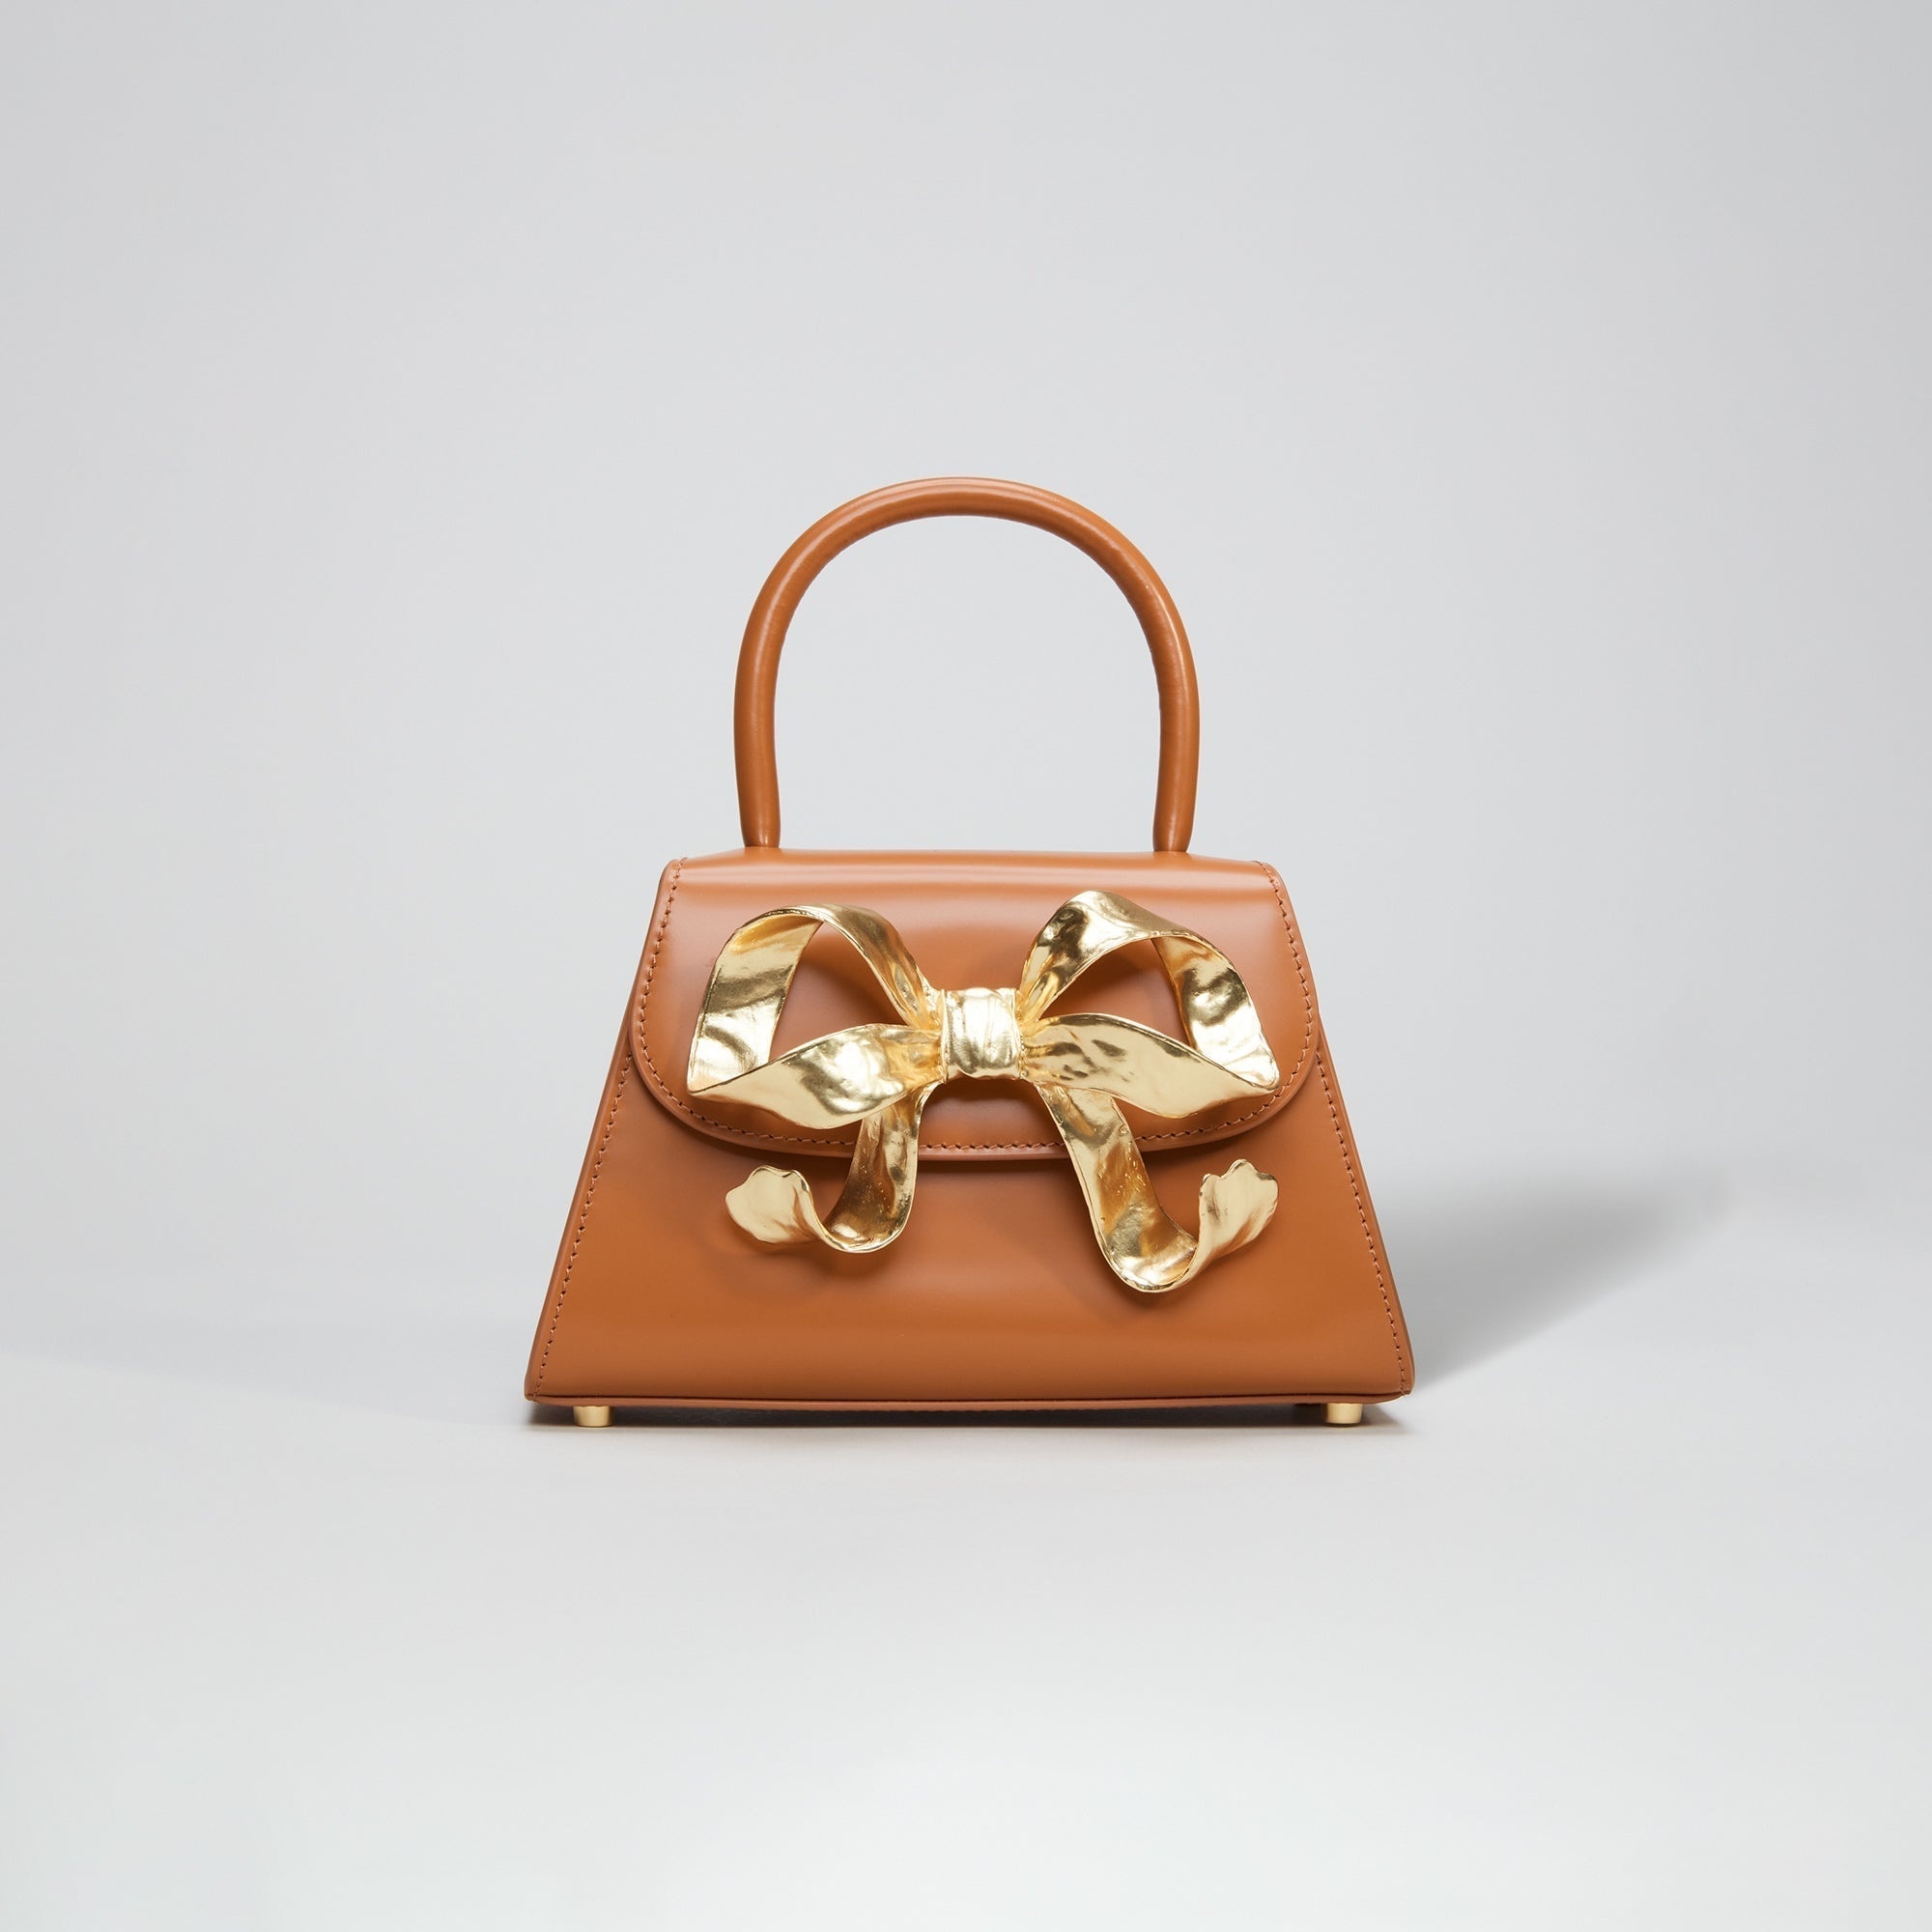 The Bow Mini in Tan with Gold Hardware - 1